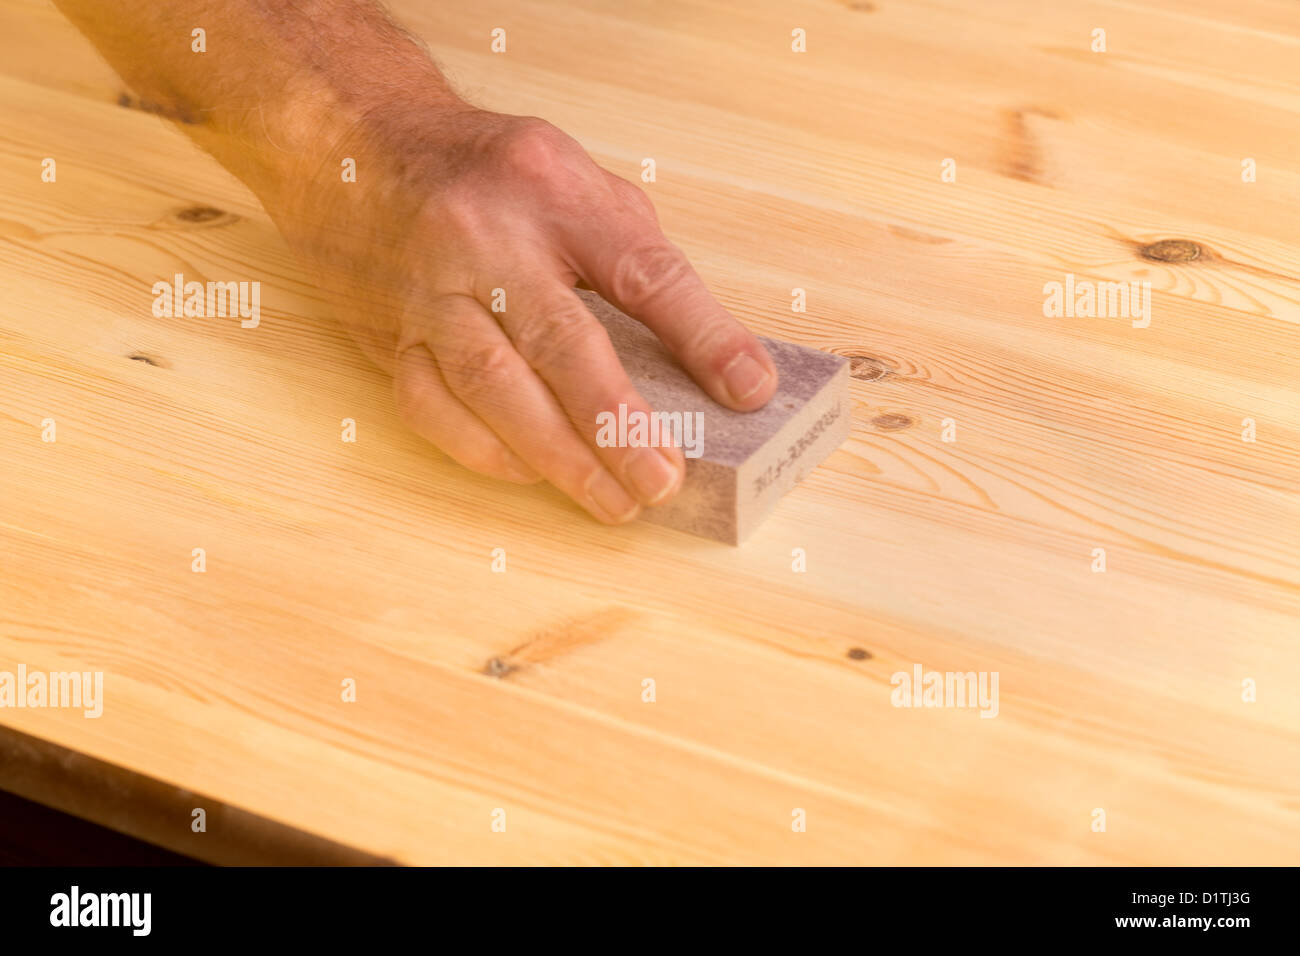 Man rubbing sanding block on pine floor or table with ghosting to suggest movement Stock Photo